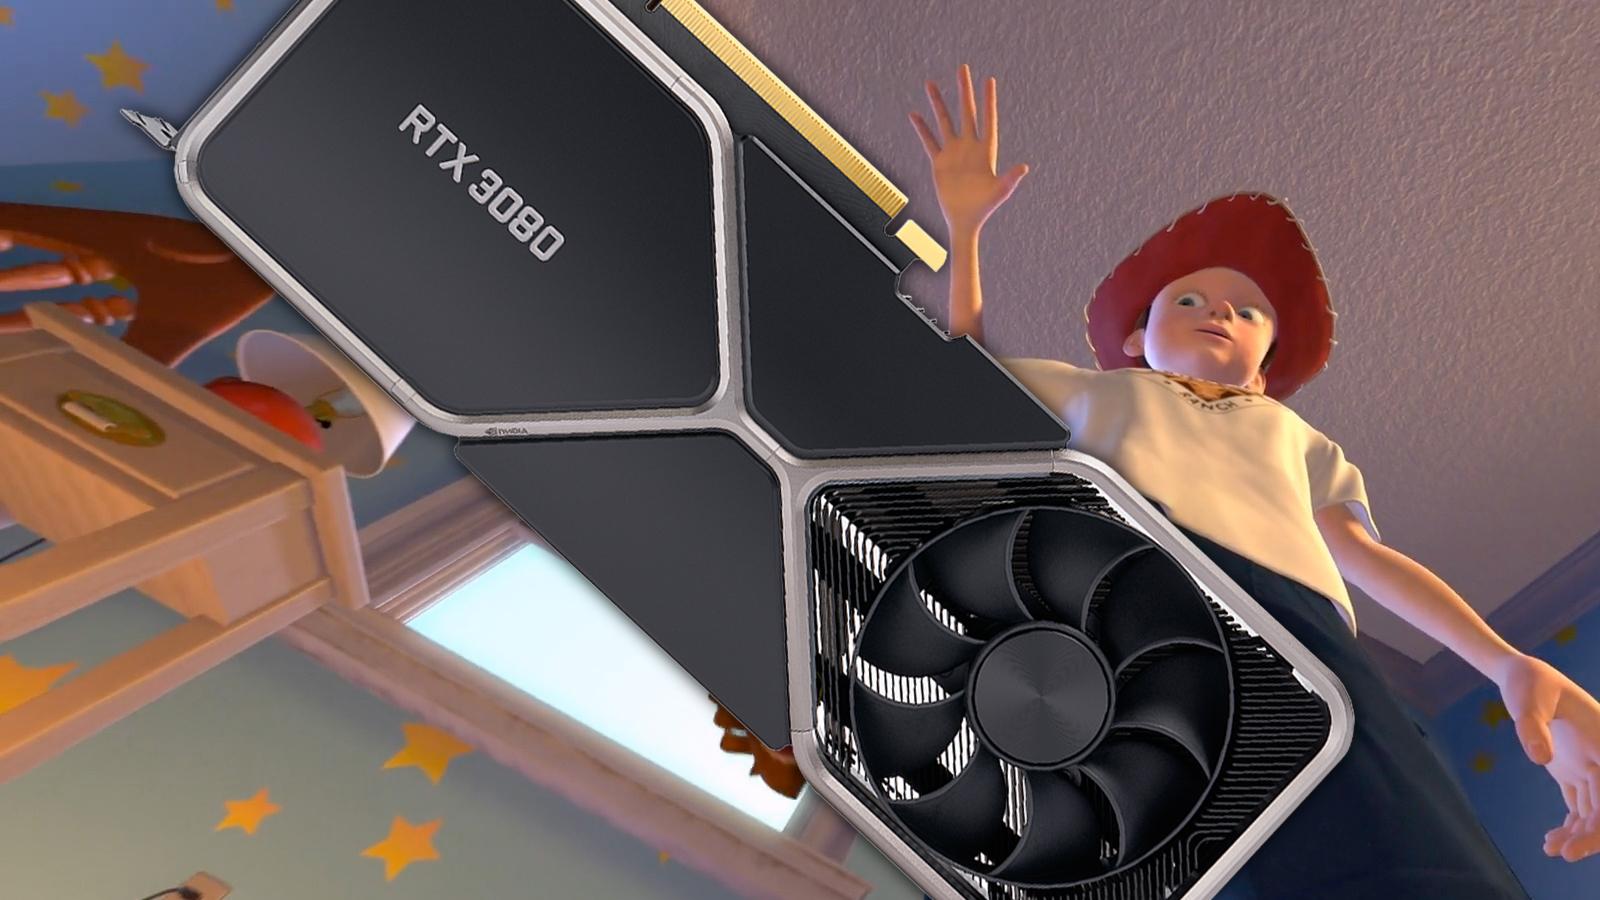 andy from toy story throwing away an nvidia founders edition card